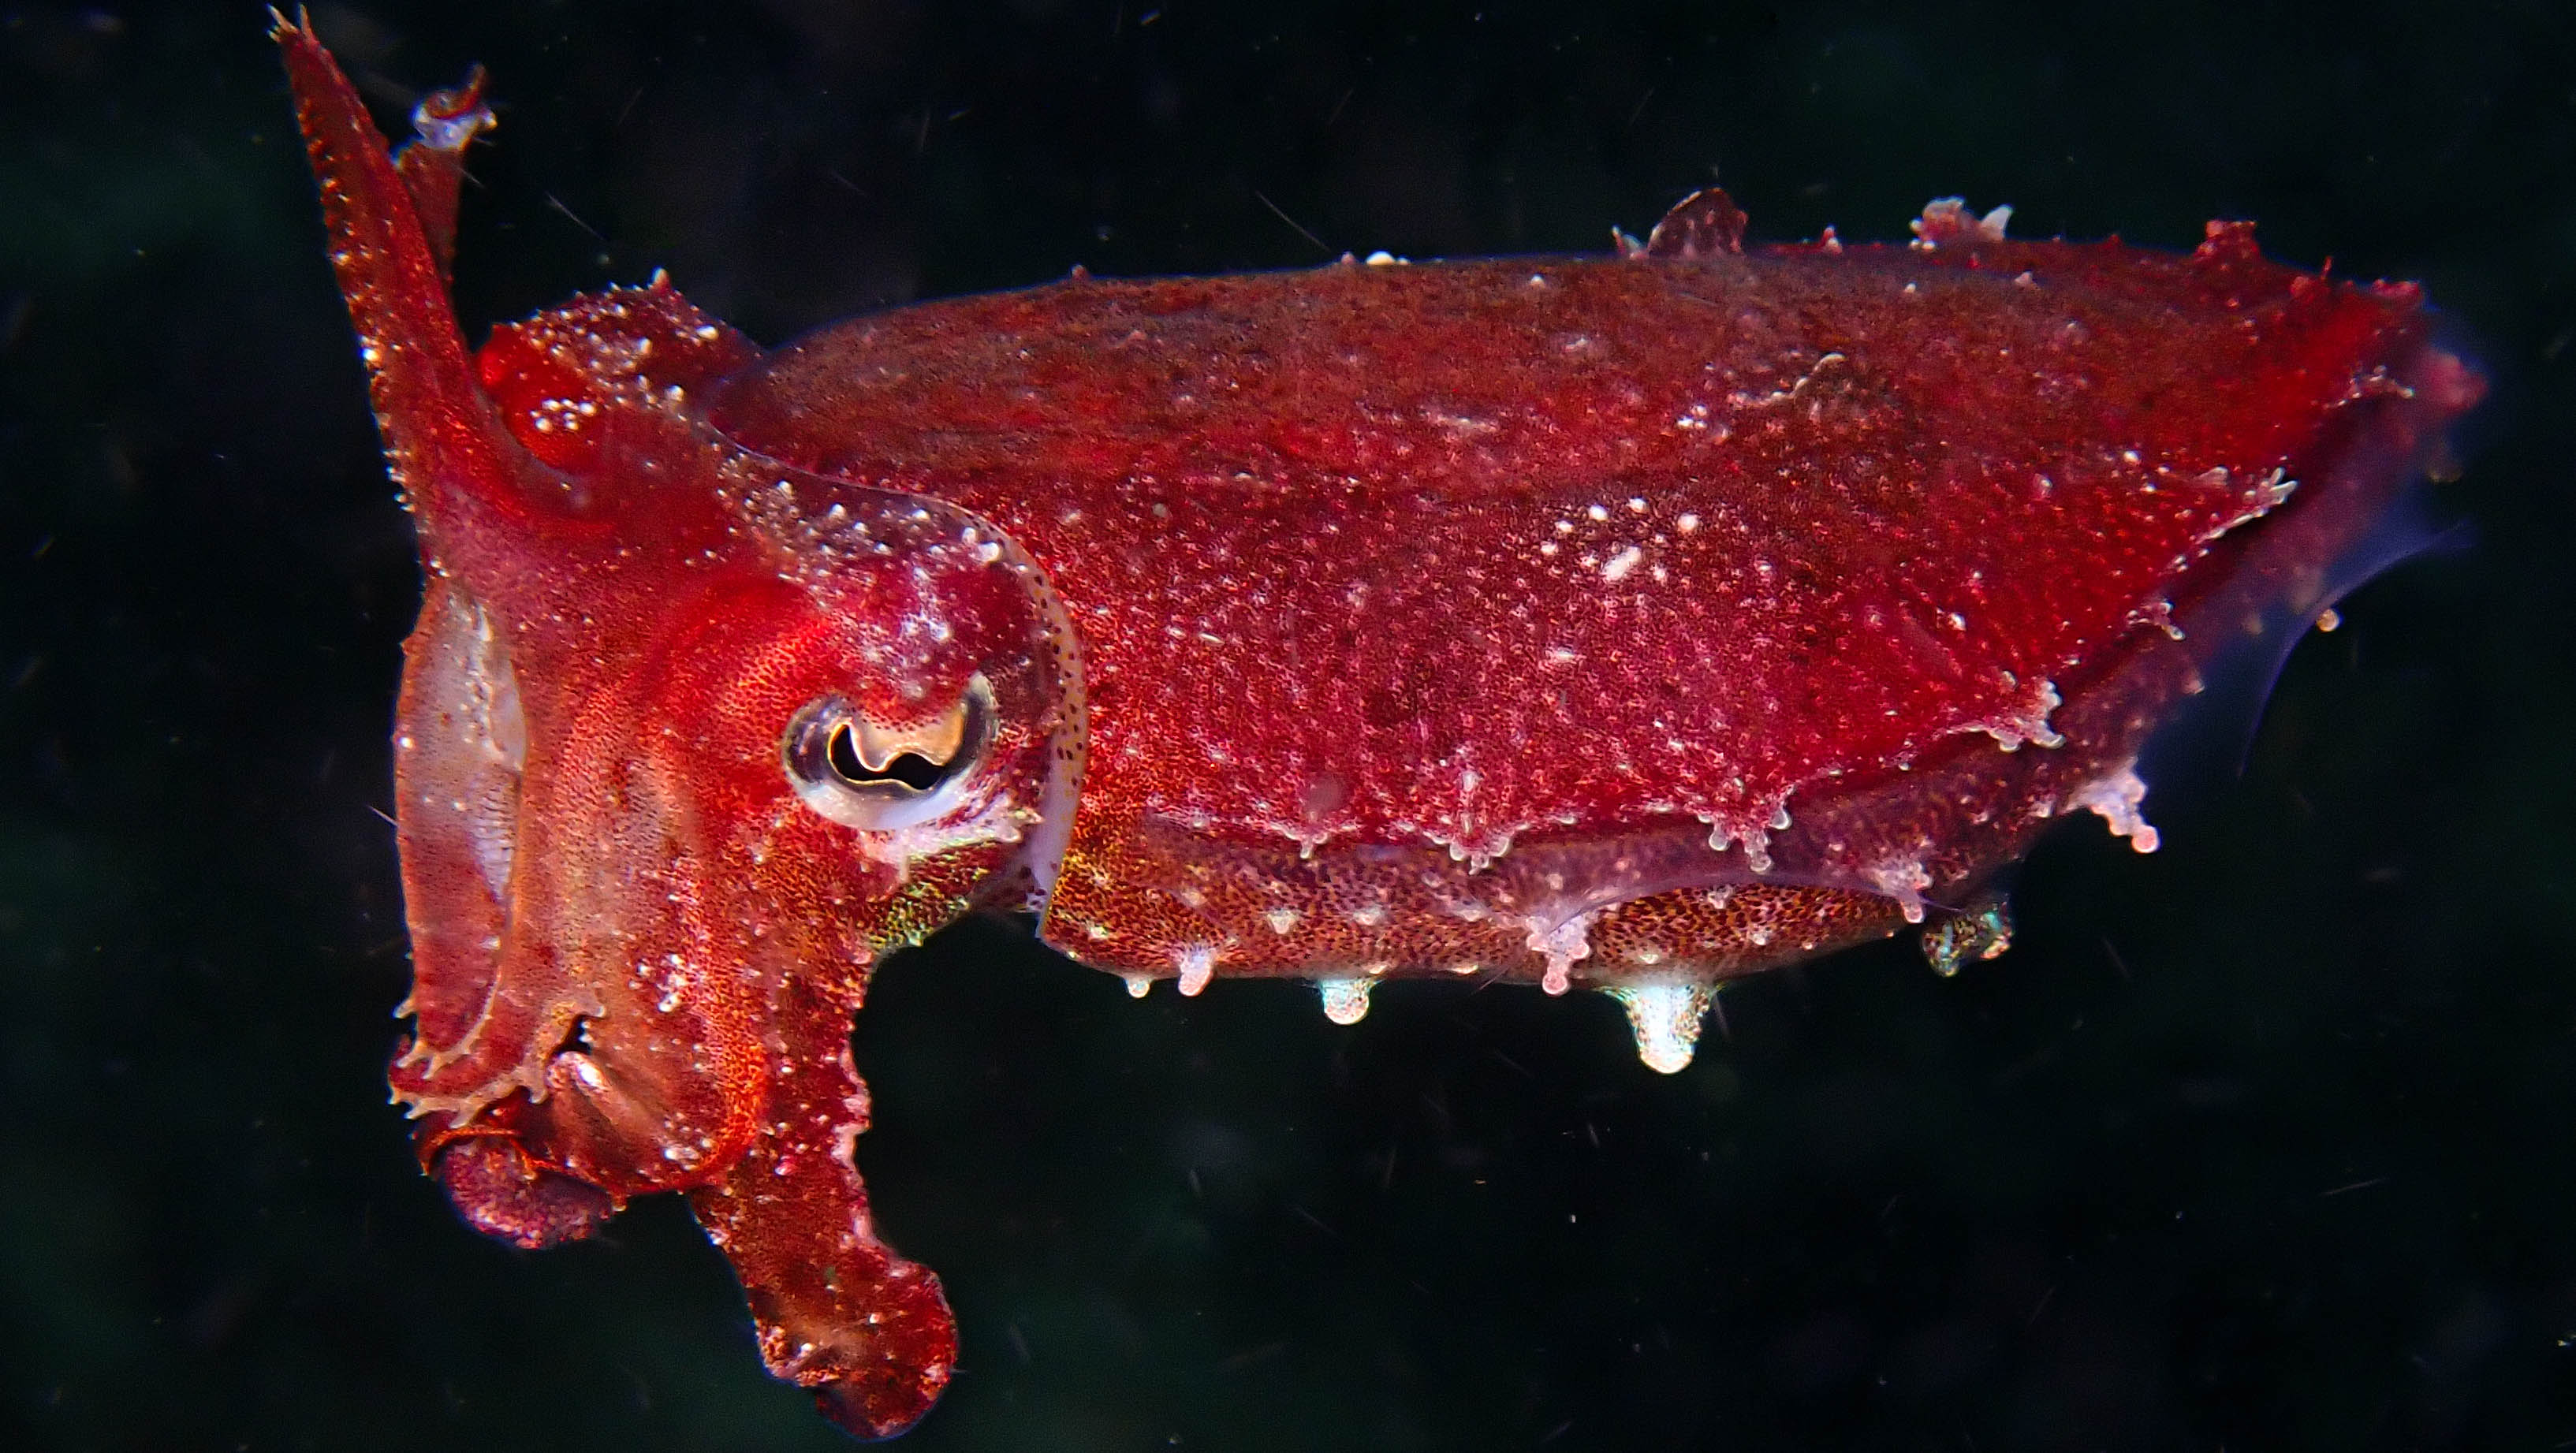 The parade of the flamboyant cuttlefish